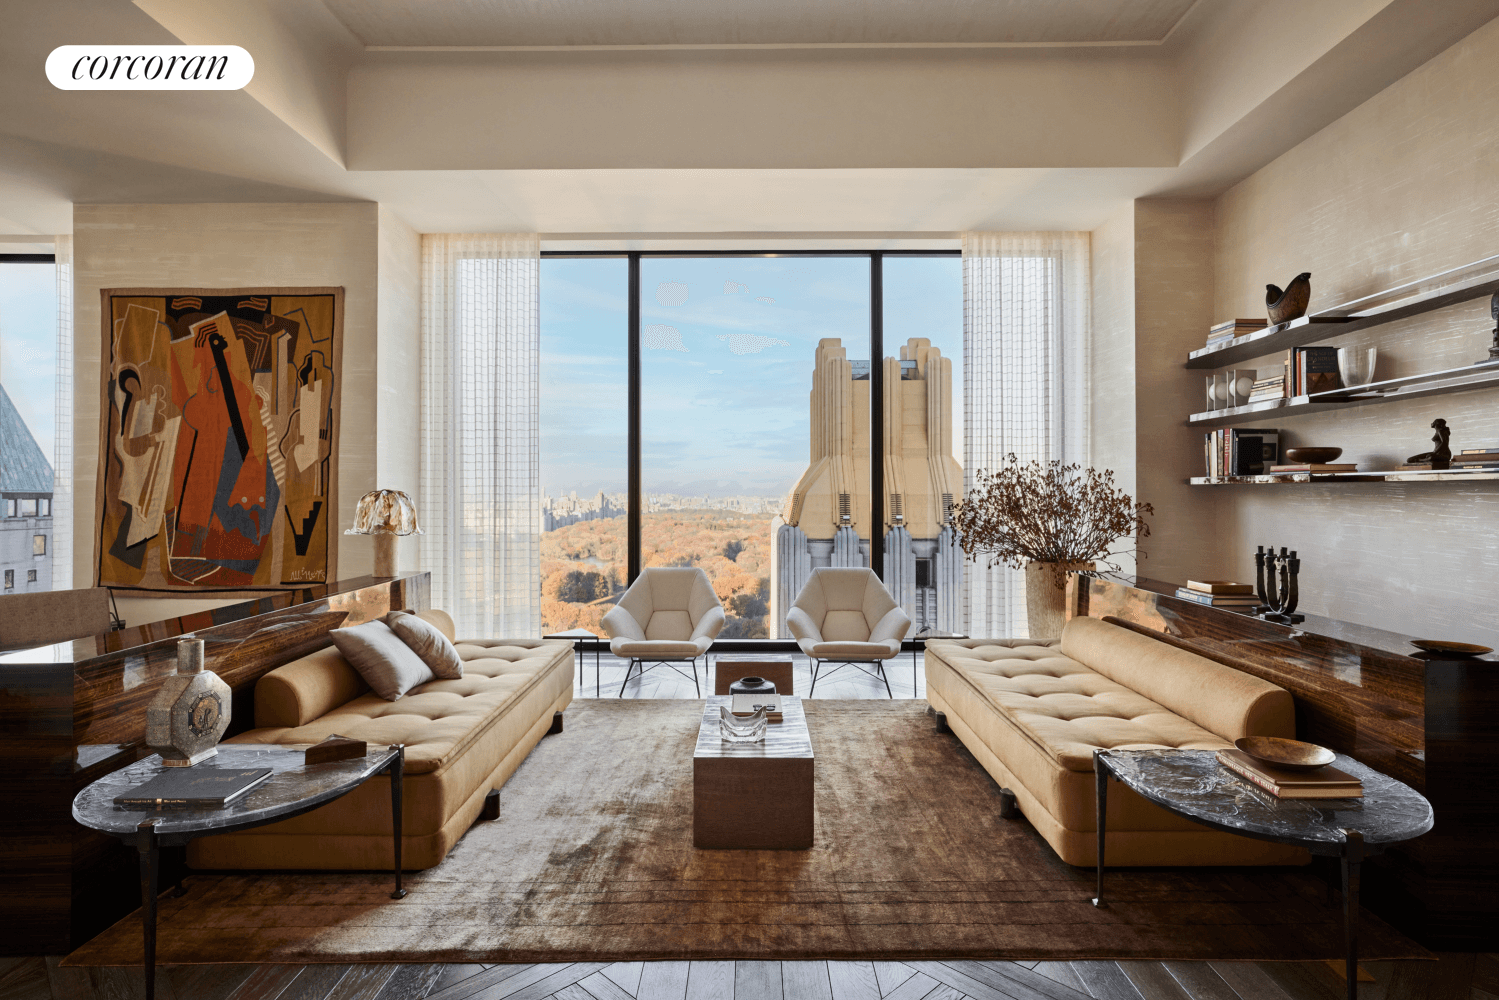 CLOSINGS HAVE COMMENCED. Enjoy beautiful views, light and high design in this prime full floor residence at 111 West 57th Street.